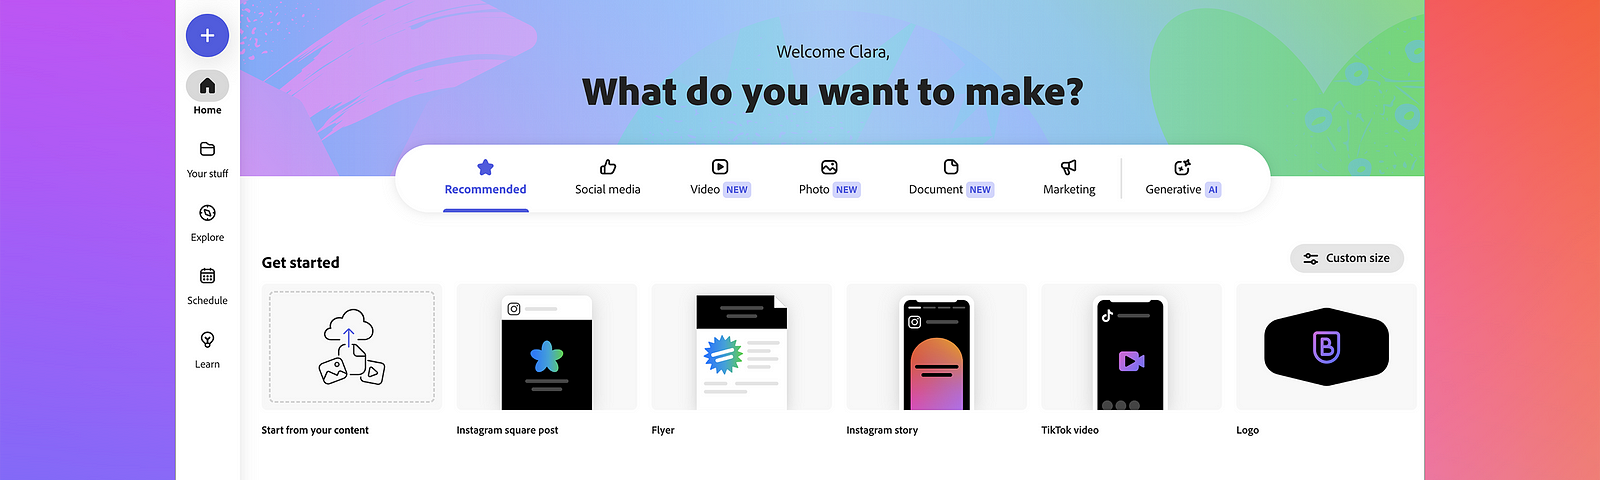 A screenshot of the web landing page of Adobe Express with the headline “Welcome Ciara, What do you want to make?